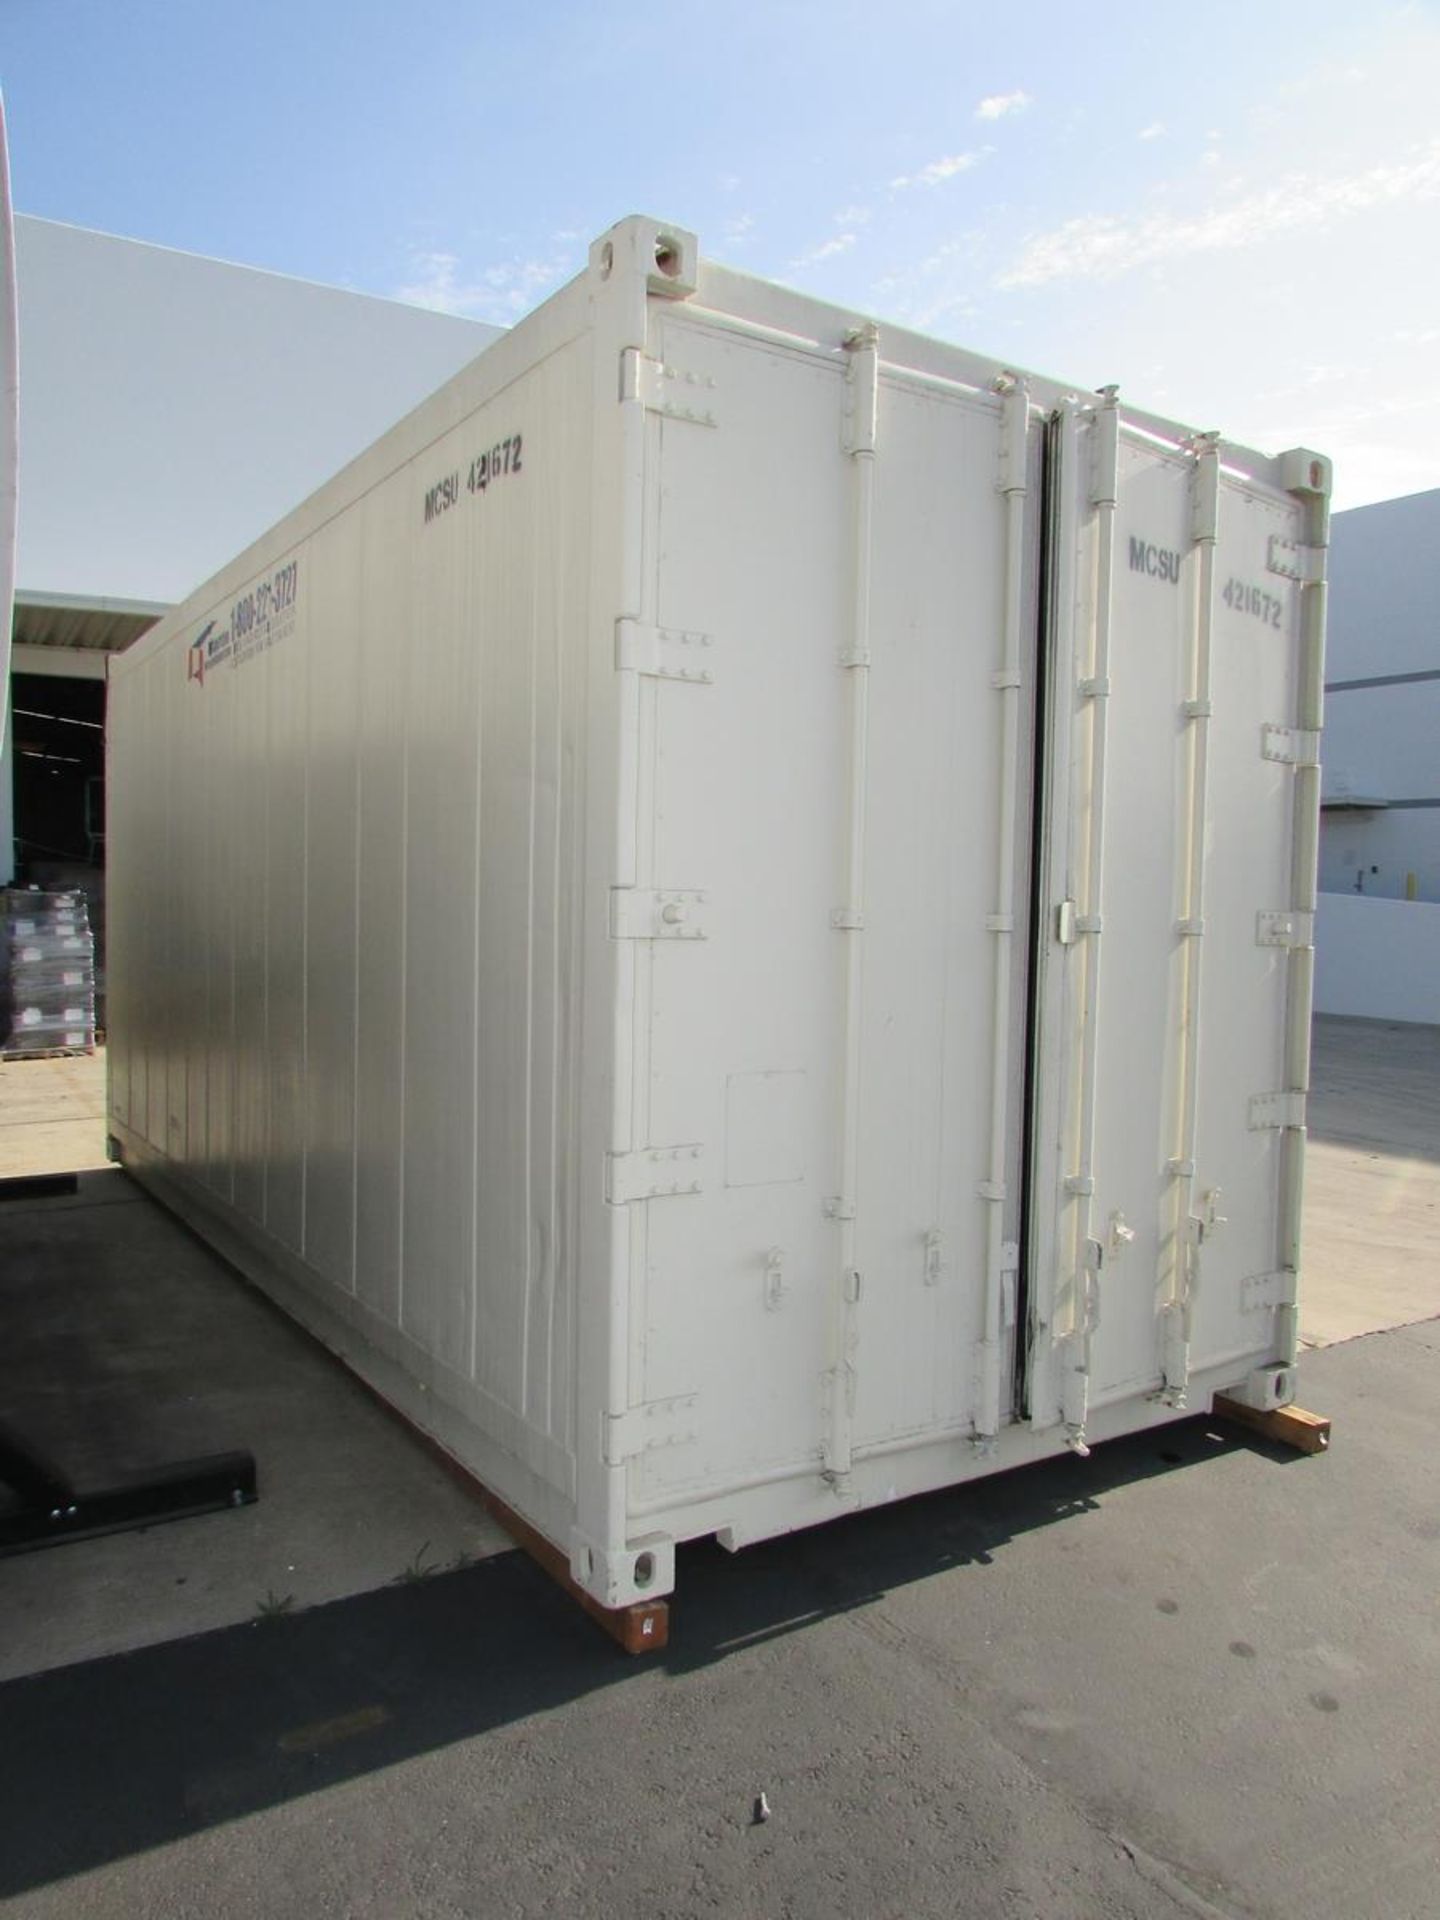 Martin 20' Dry Refrigerated Shipping Container (2006) - Image 18 of 22